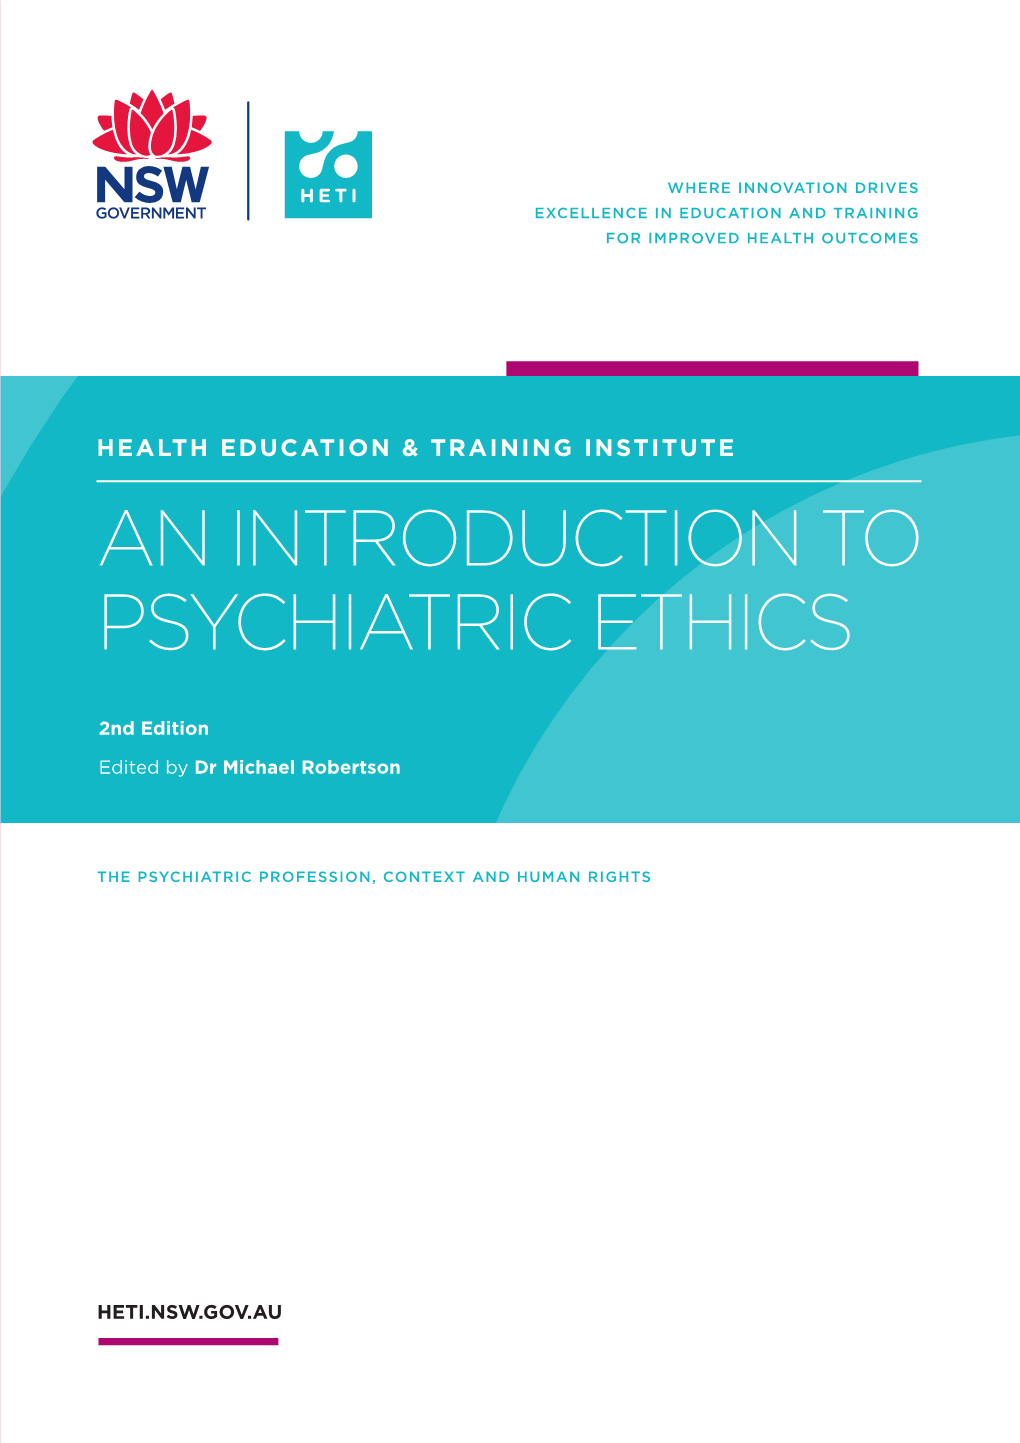 An Introduction to Psychiatric Ethics Health Education & Training Institute an Introduction to Psychiatric Ethics